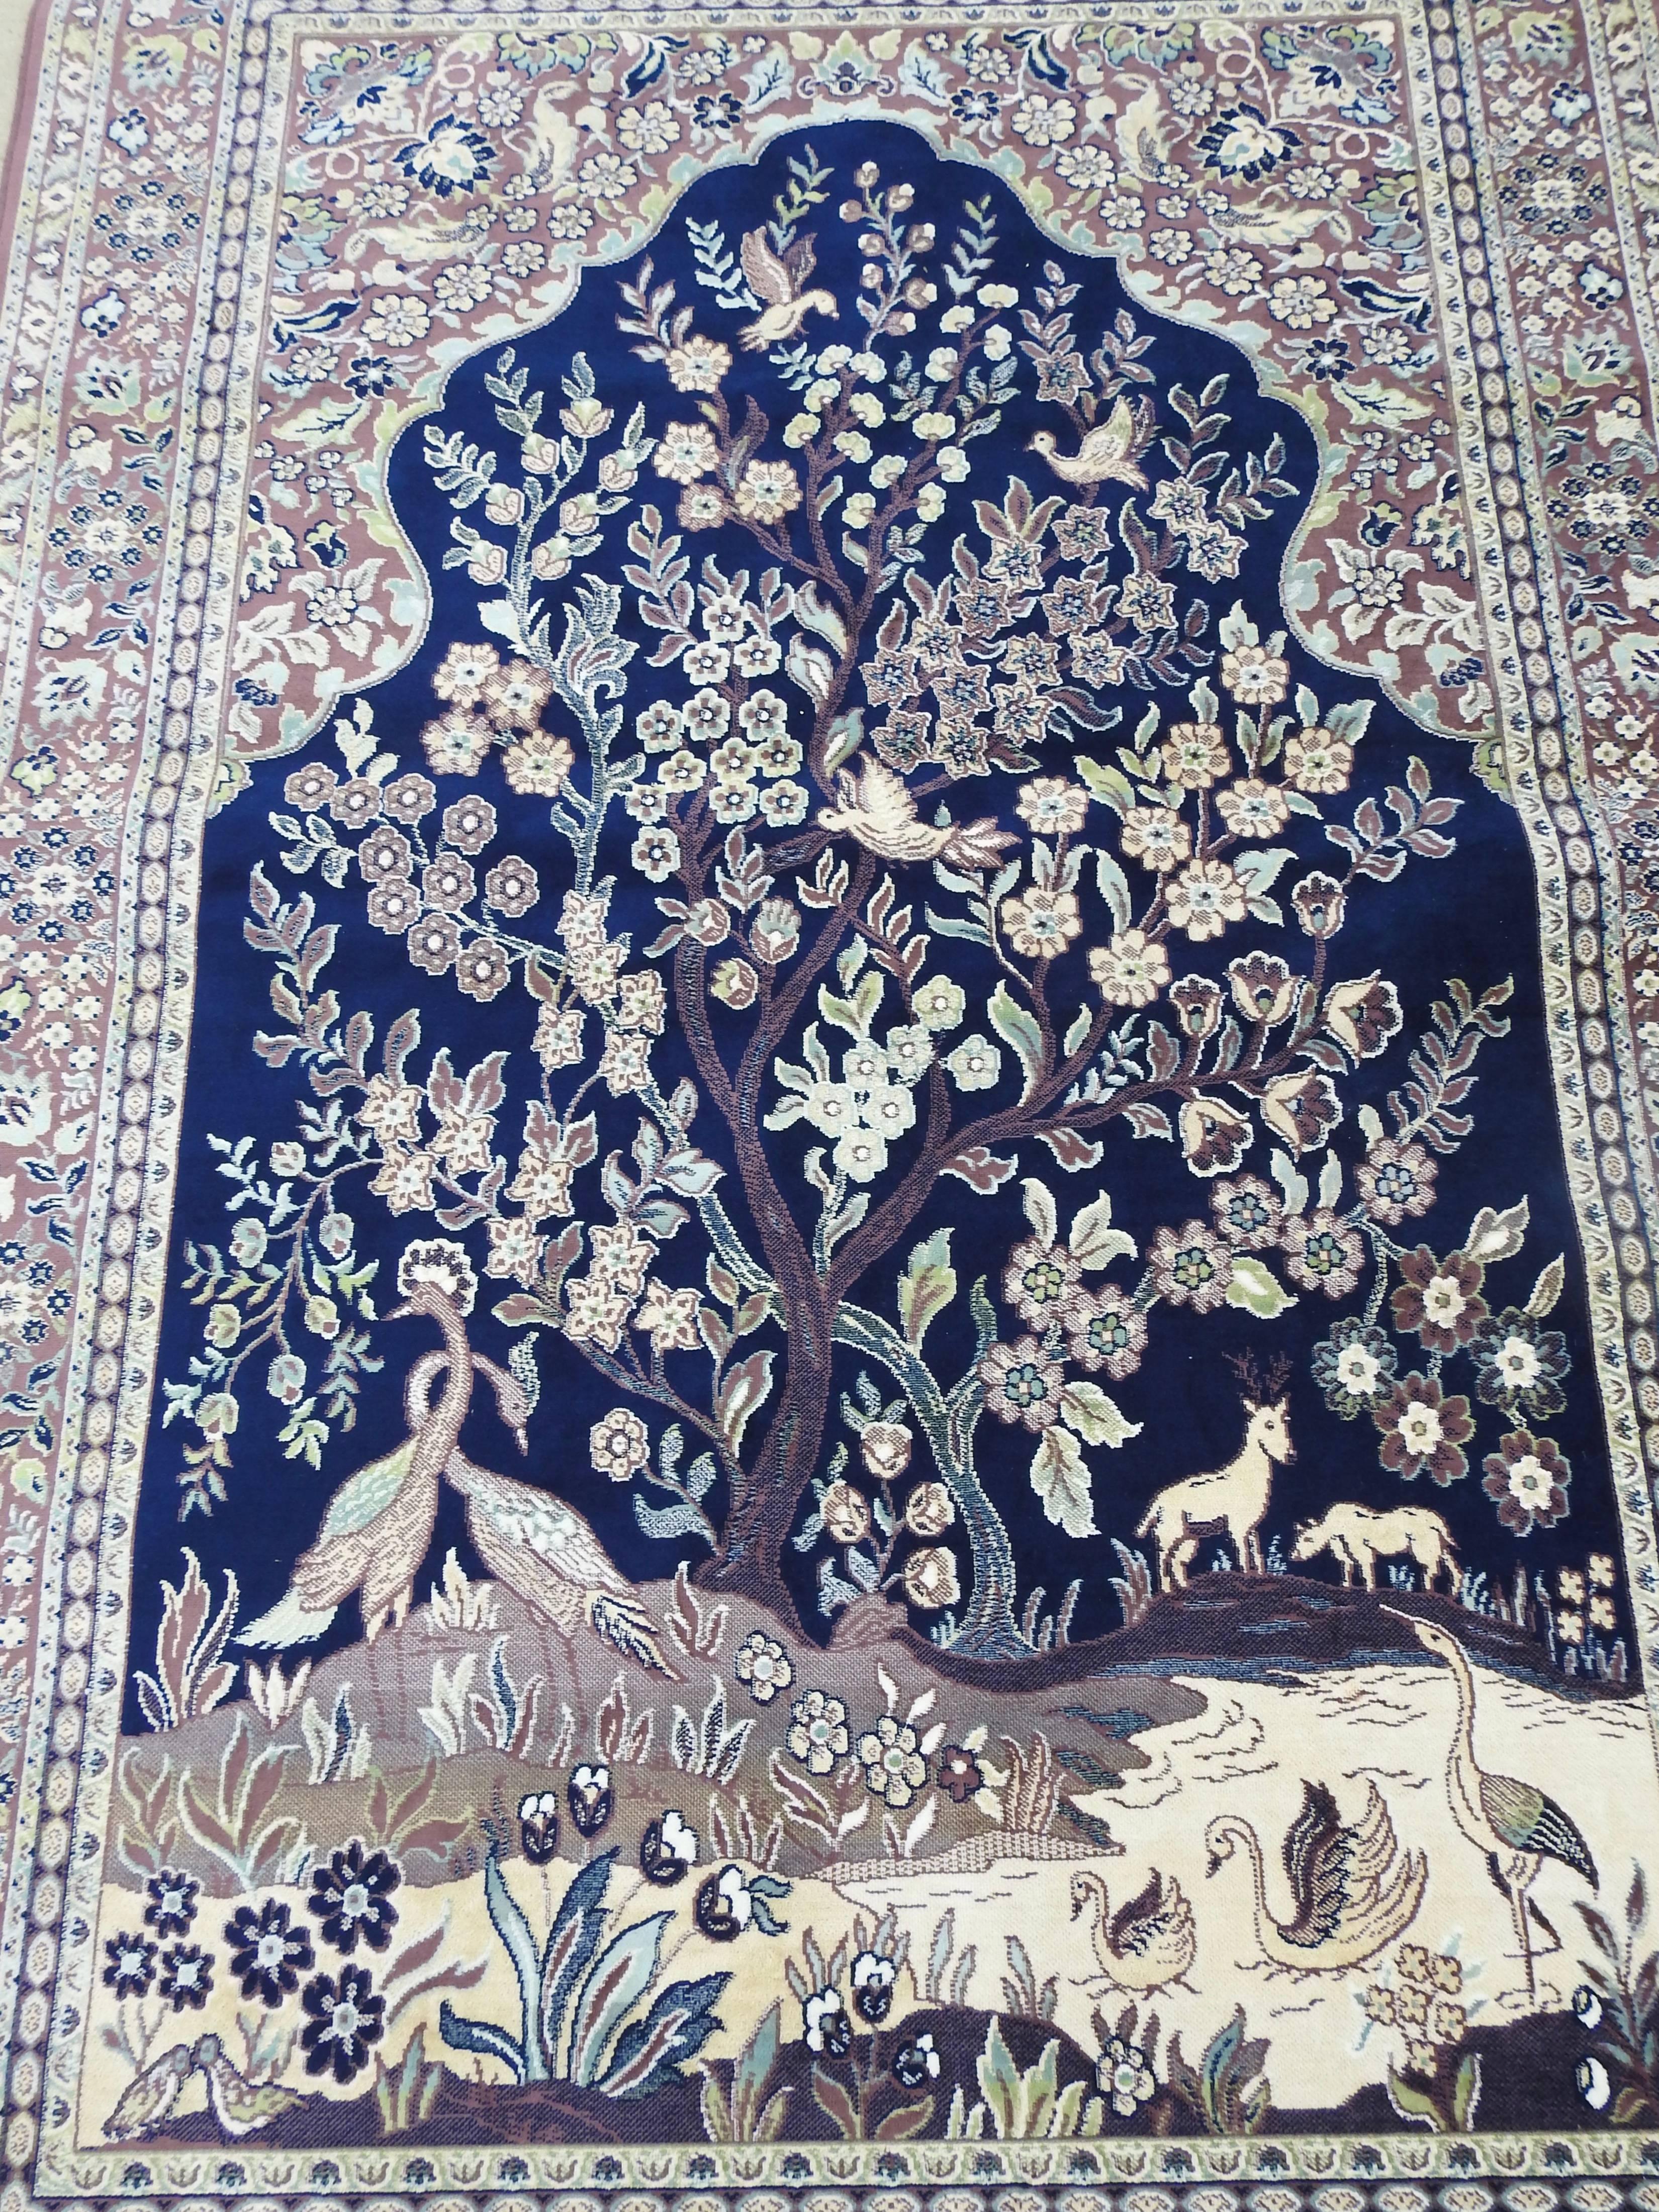 Soft shades of navy blue, lavender and cream make this rug a beautiful melody of silk. Flowers, trees and a variety of animals are surrounded by a decorative border. There is fringe on the ends to complete the look. A rod pocket has been added to